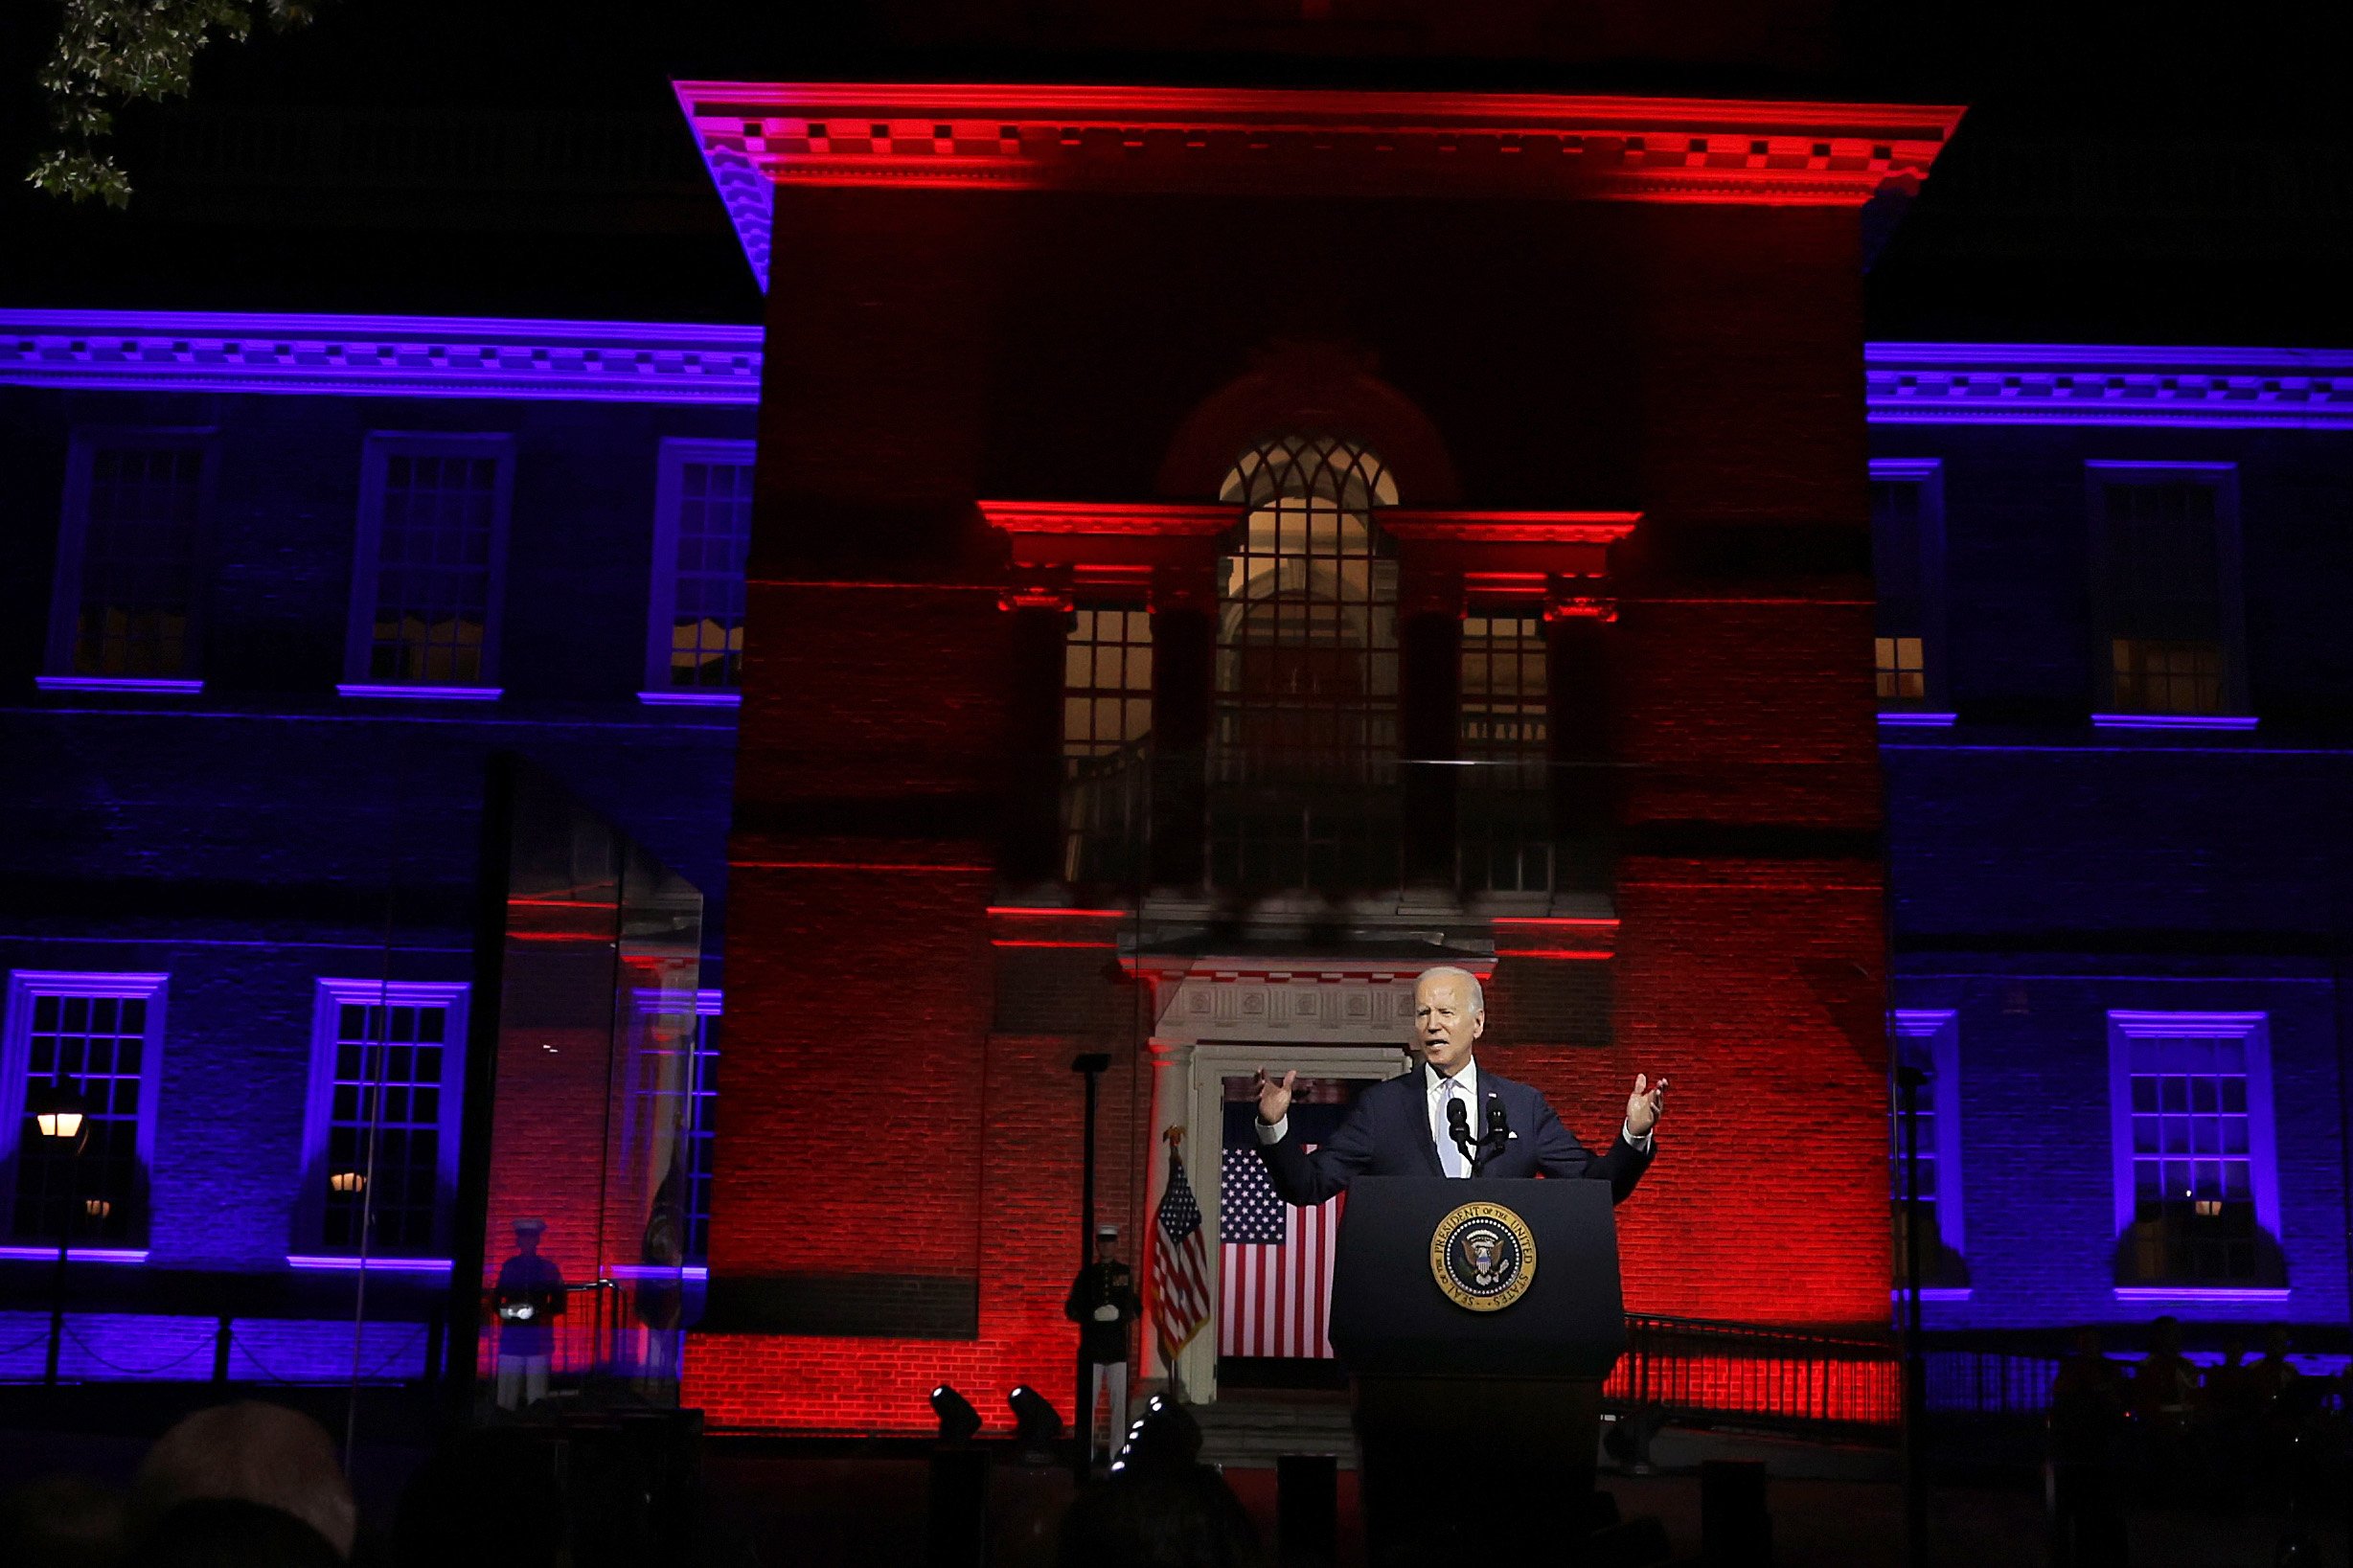  U.S. President Joe Biden delivers a primetime speech at Independence National Historical Park September 1, 2022 in Philadelphia, Pennsylvania. President Biden spoke on “the continued battle for the Soul of the Nation.” (Photo by Alex Wong/Getty Images)